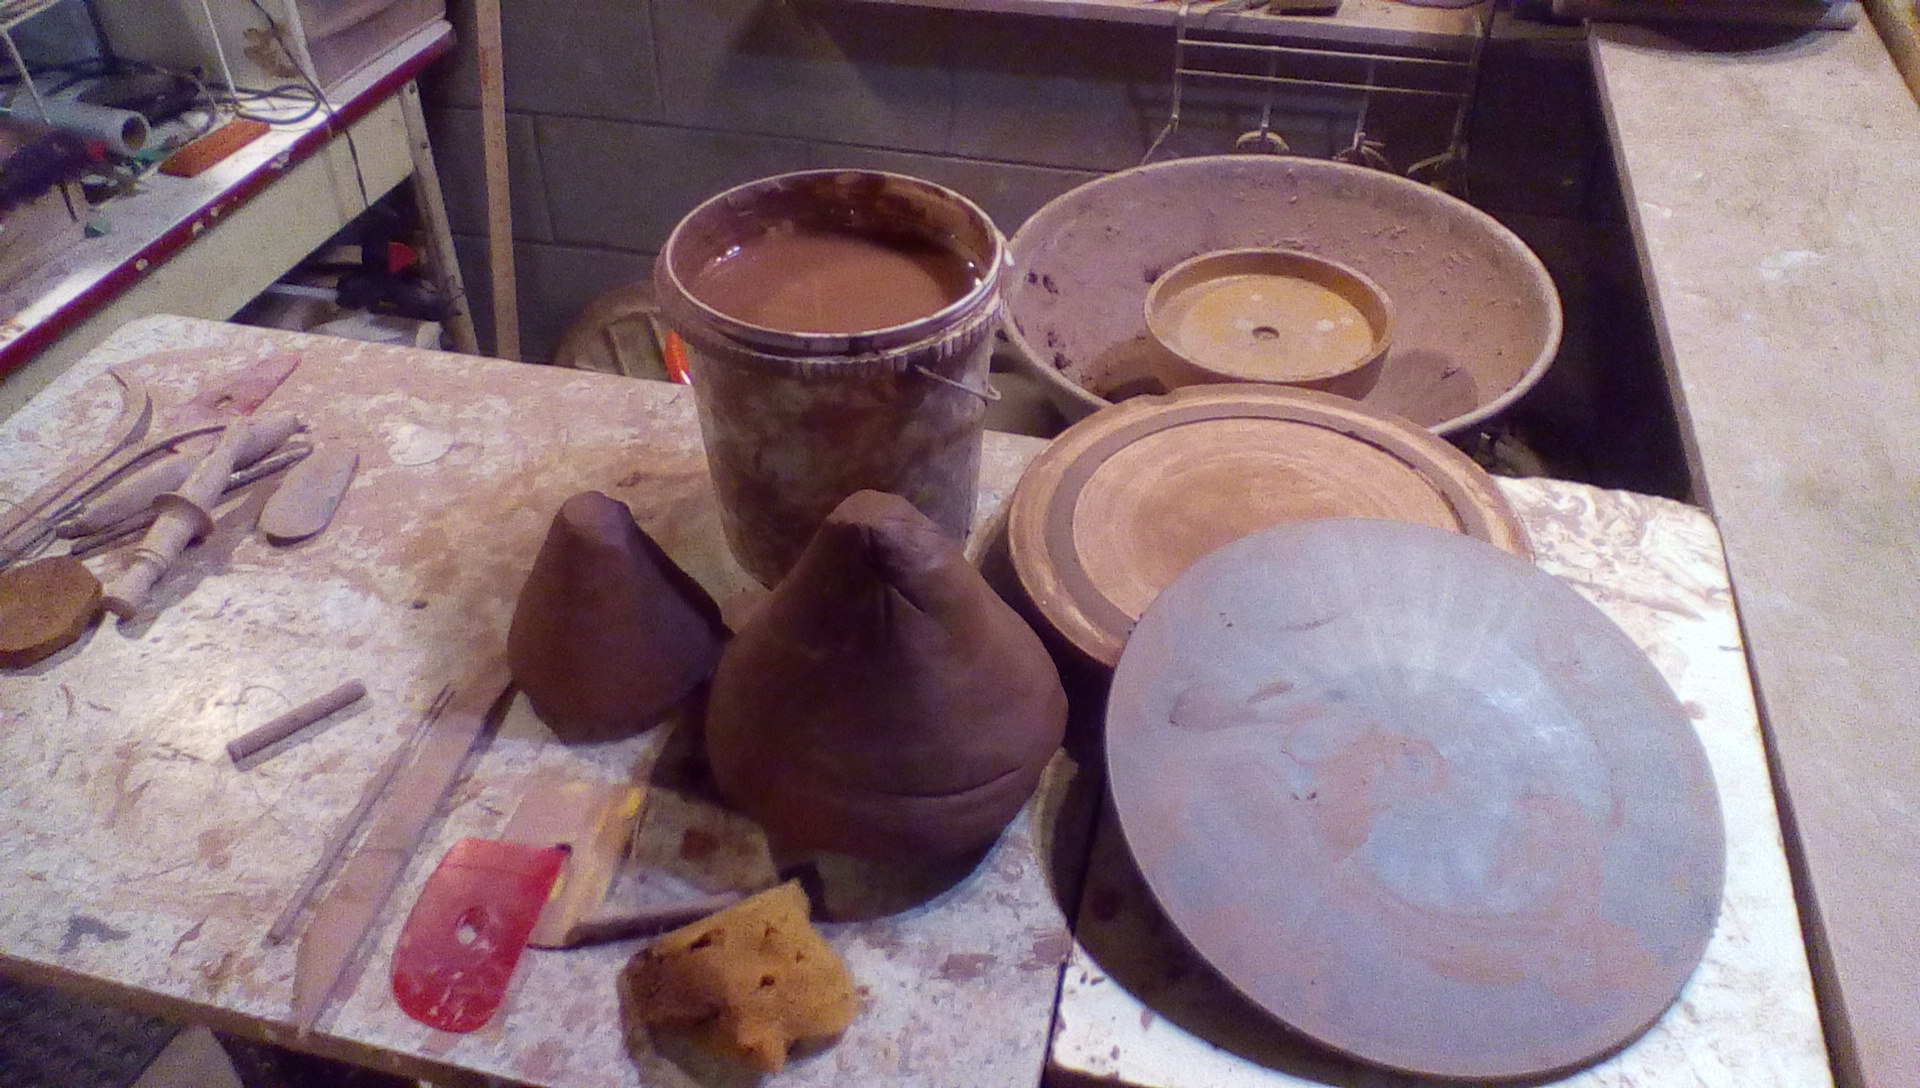 clay and pottery tools